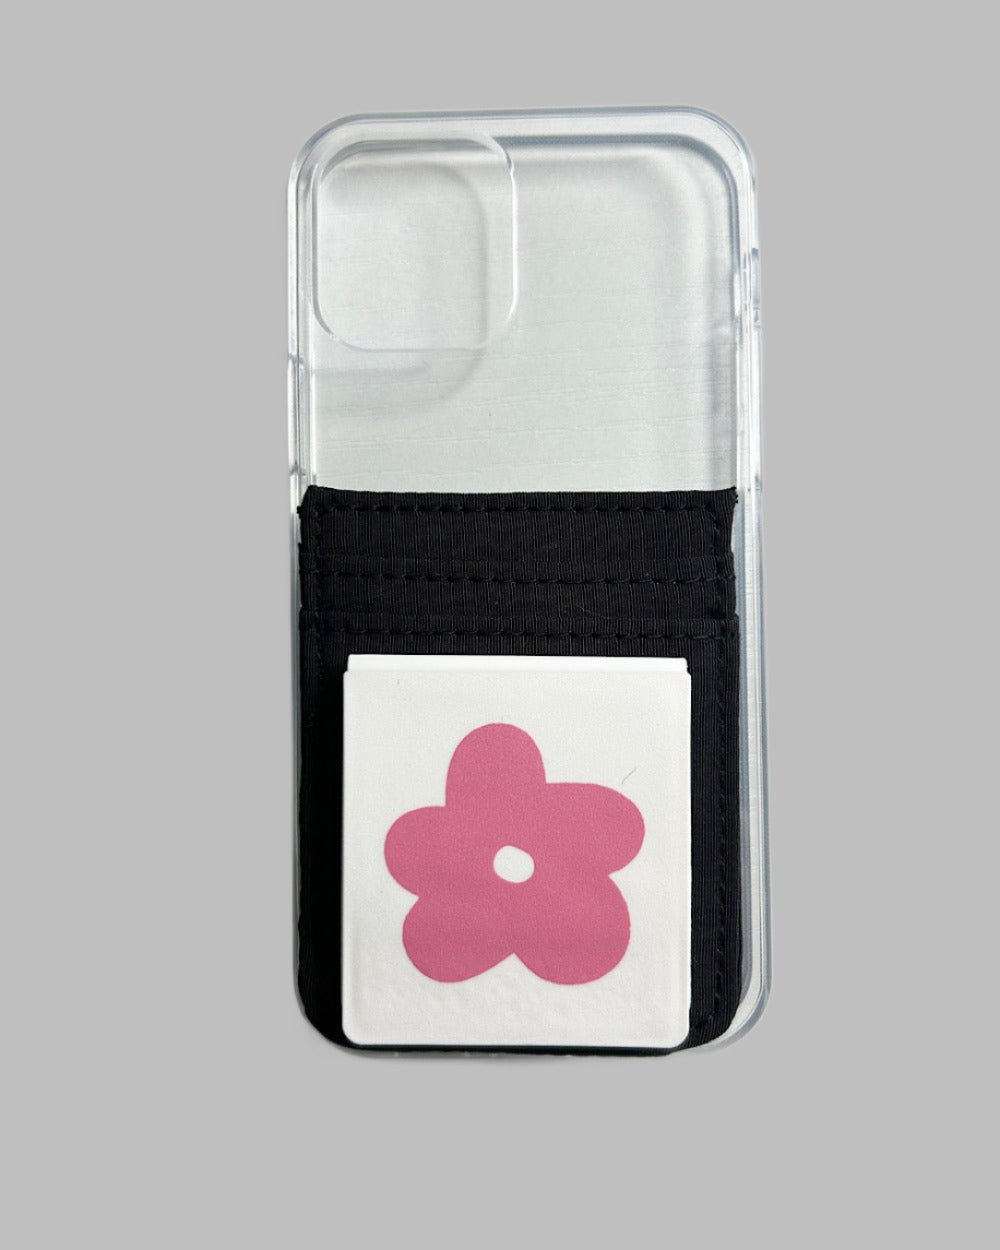 podangle flower power stand with wallet set SPECIAL SAVE 20%